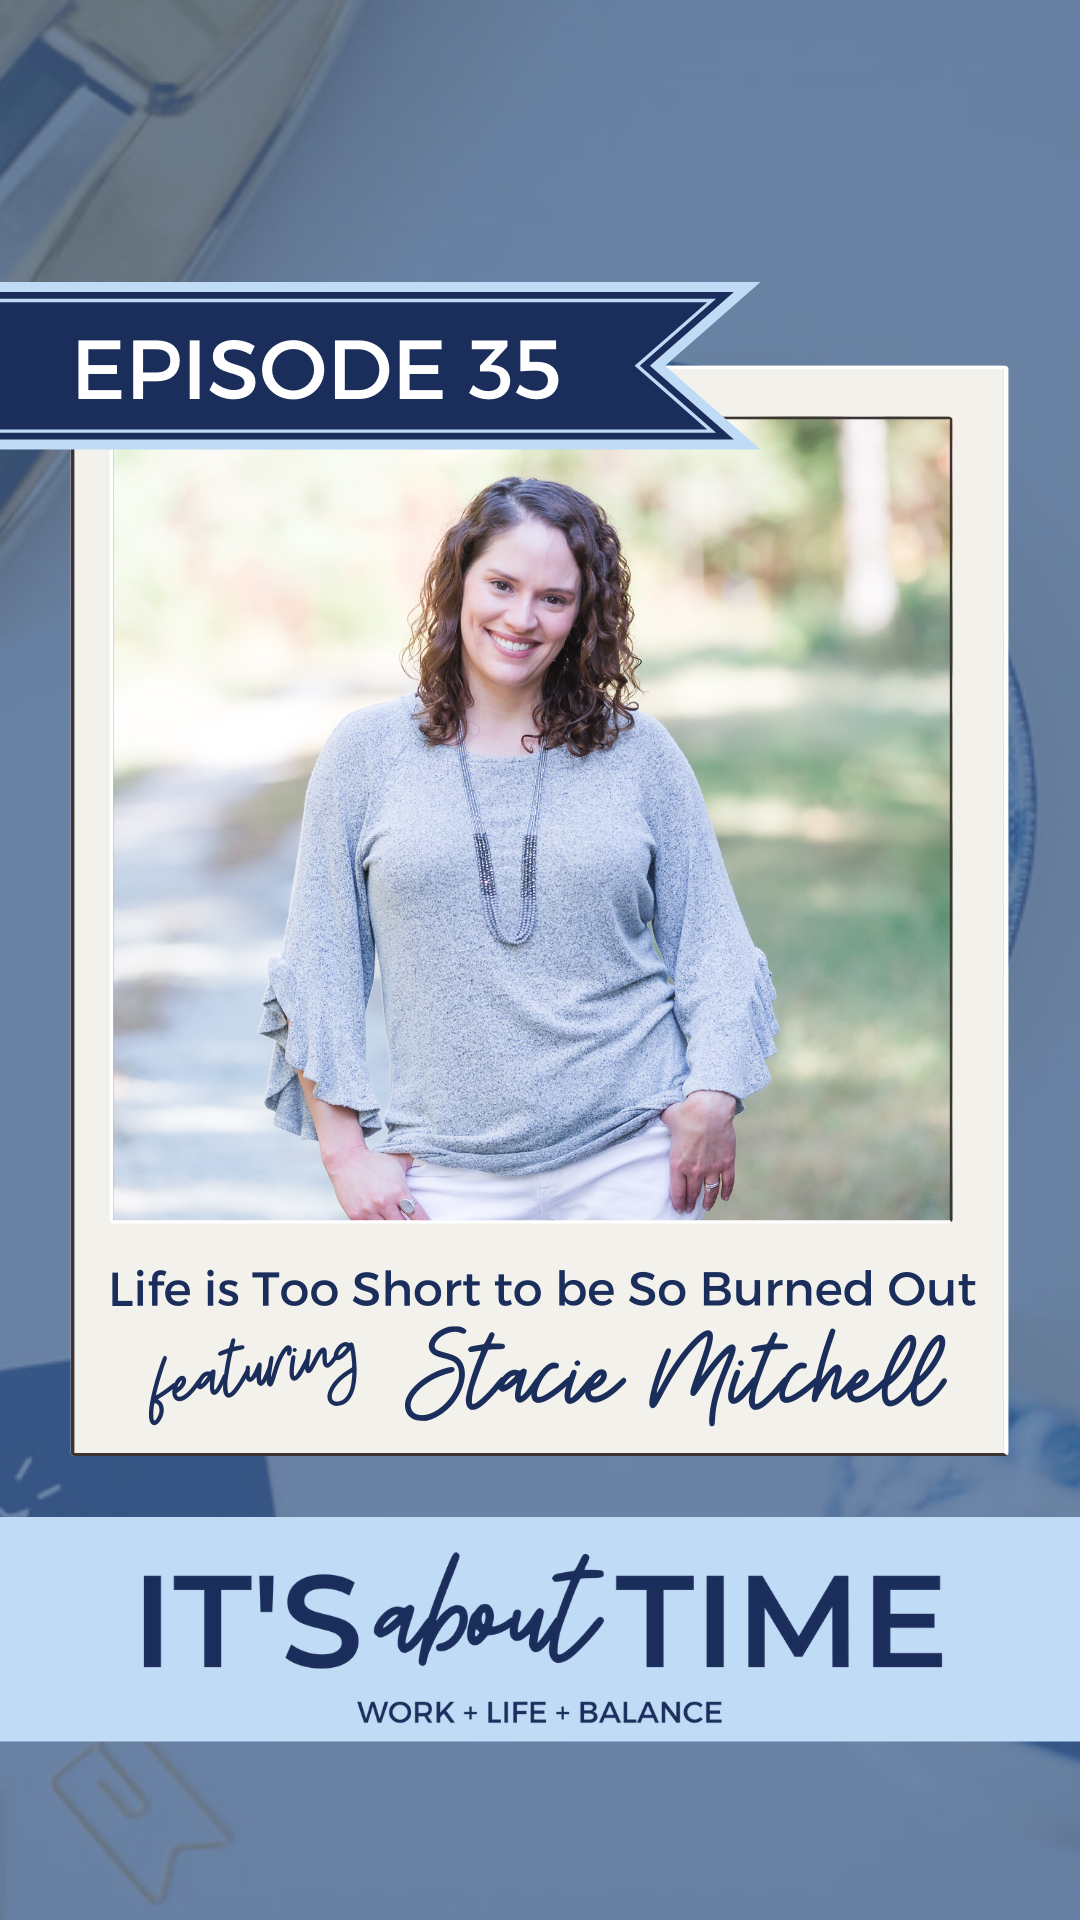 stacie-mitchell-burnout-coach.png